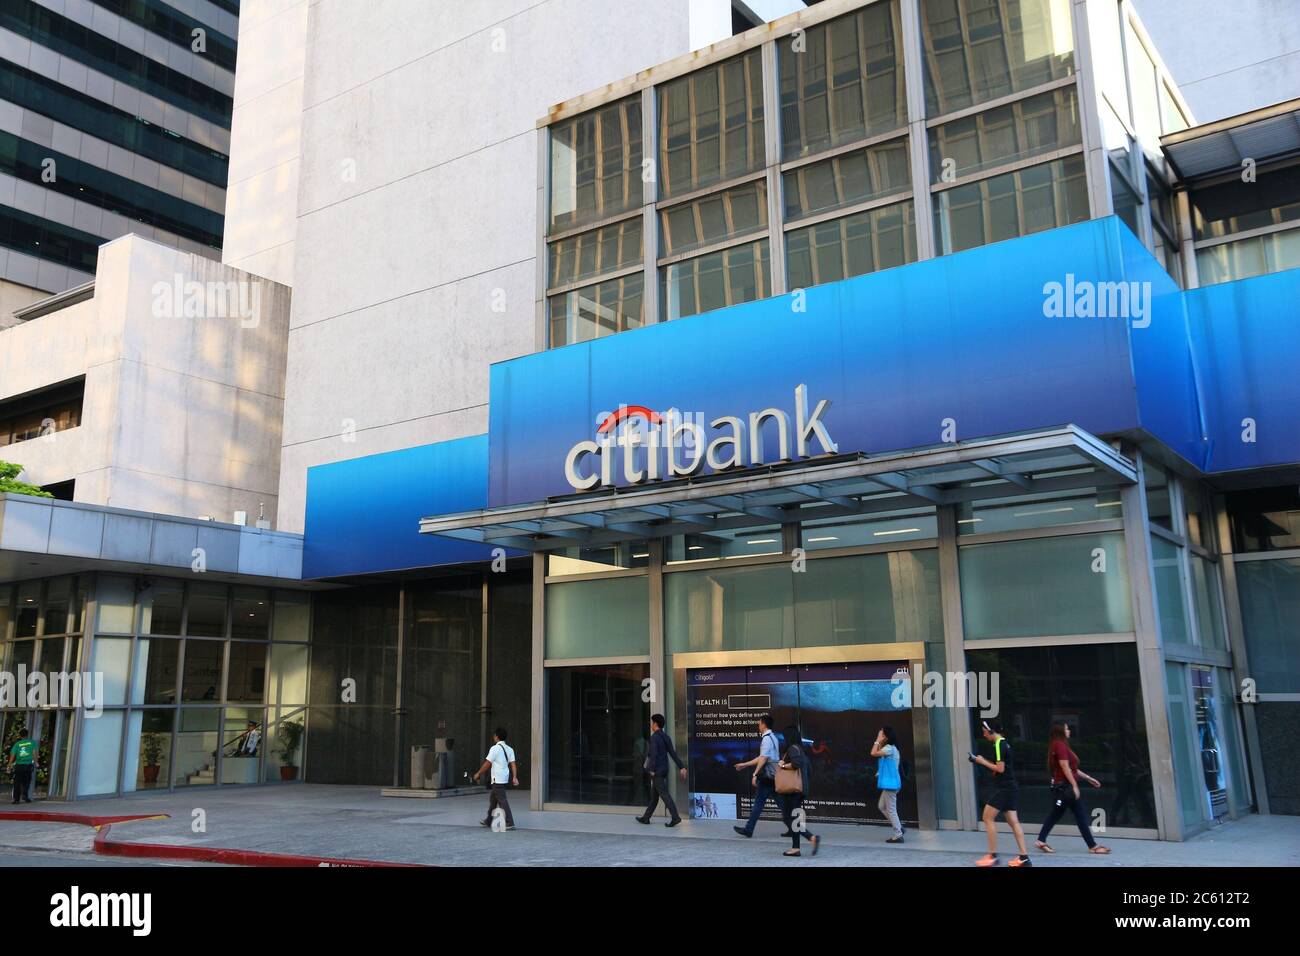 MANILA, PHILIPPINES - NOVEMBER 28, 2017: People walk by Citibank branch in Manila, Philippines. The bank is part of Citigroup, American investment gro Stock Photo